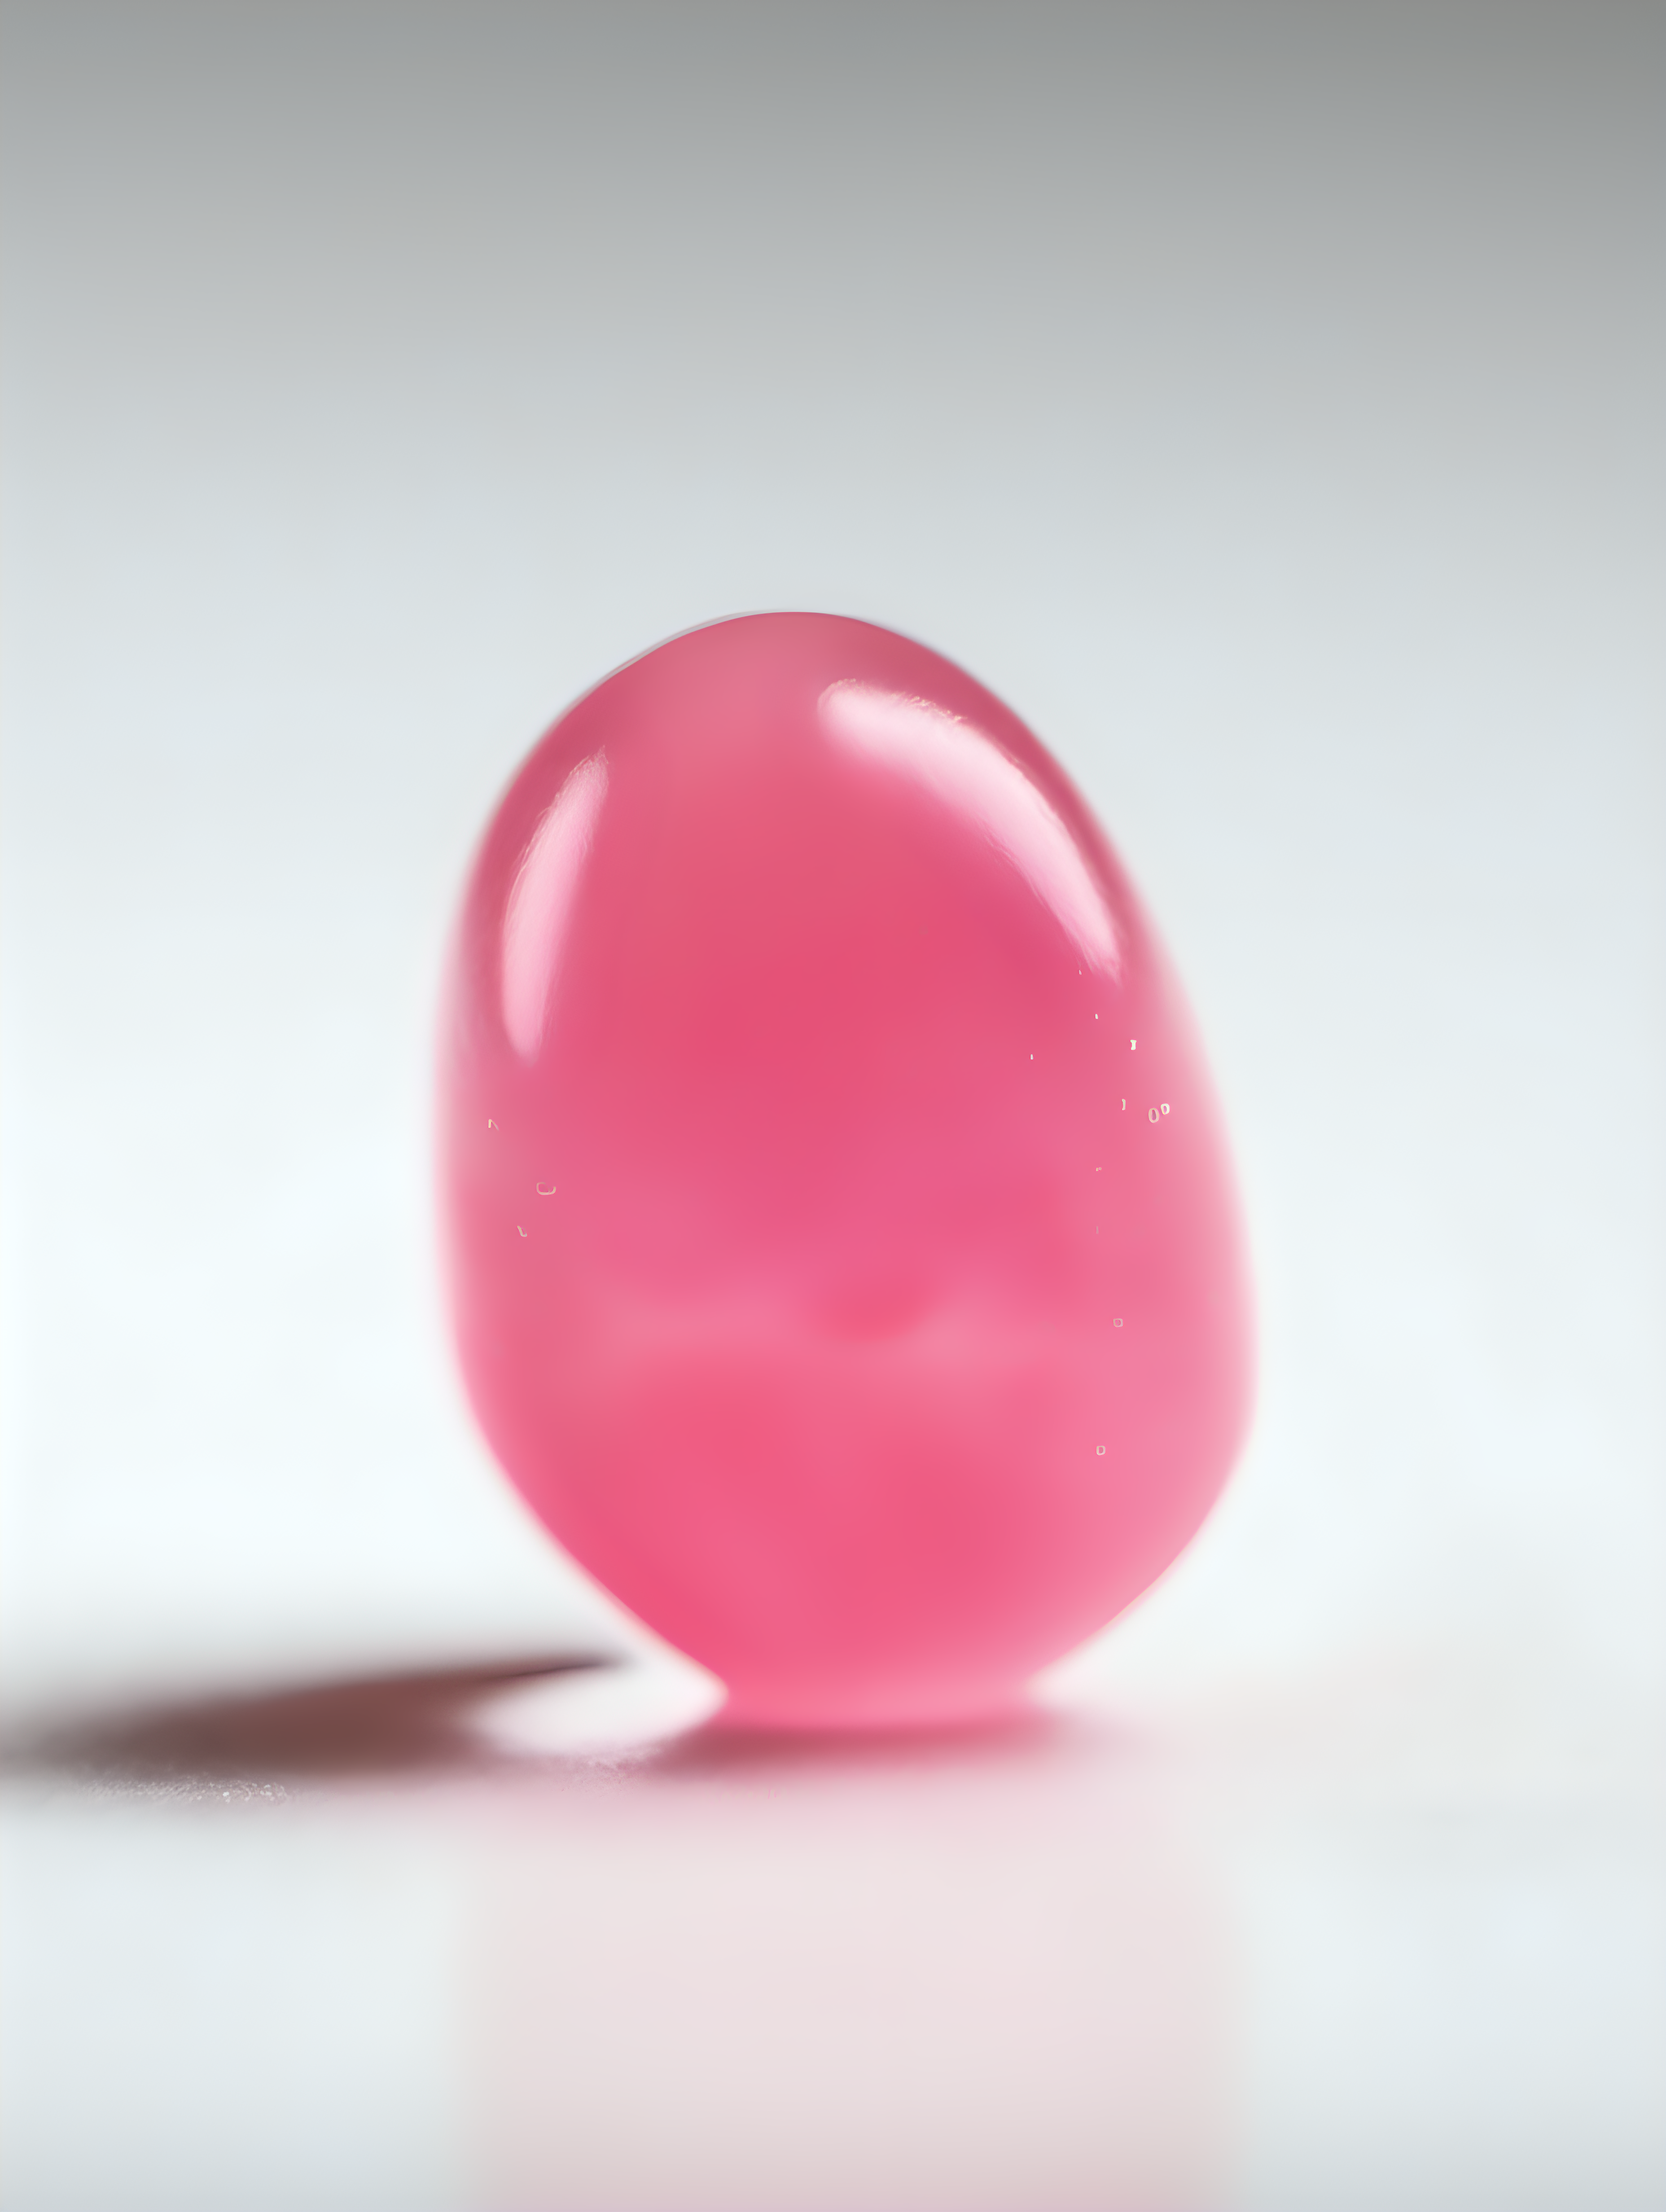 ARTISTIC STUDIO MACRO PHOTOGRAPH OF A SINGLE PINK JELLYBEAN ON A WHITE BACKGROUND
 